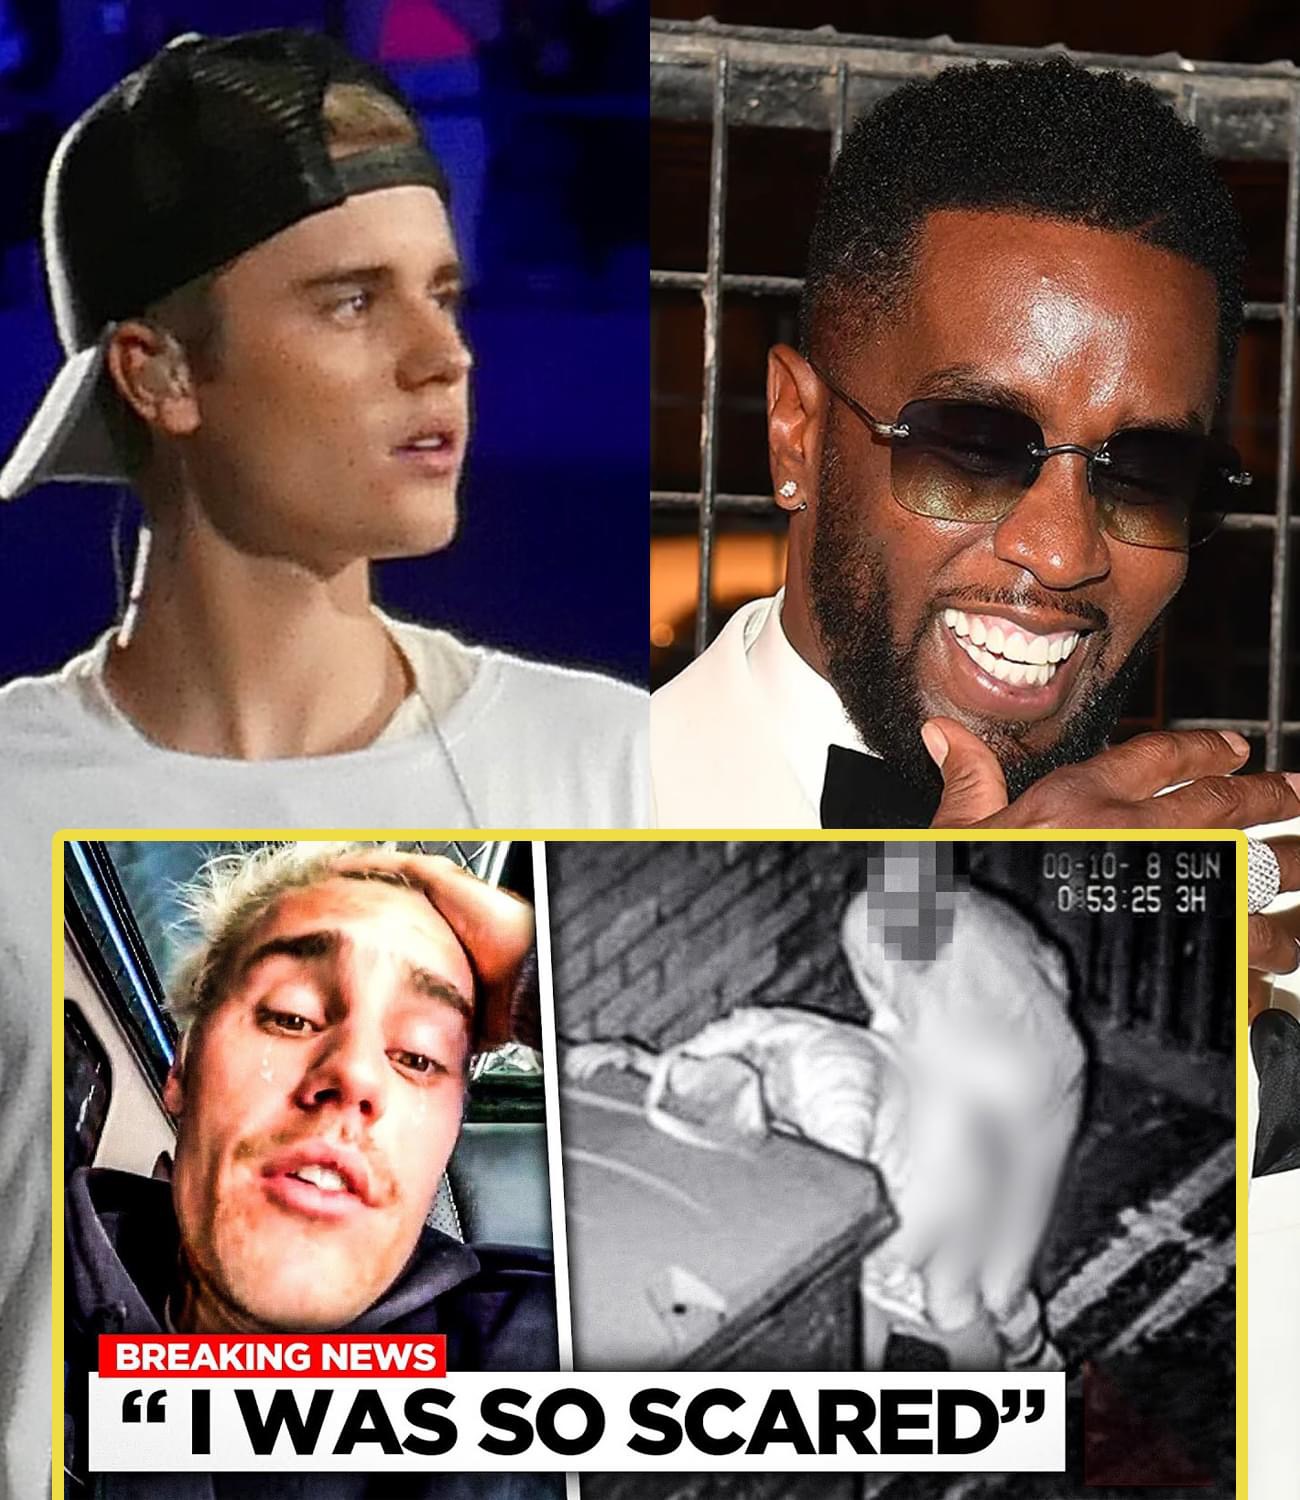 Justin Bieber: “Diddy FORCED Me To SUCK It”